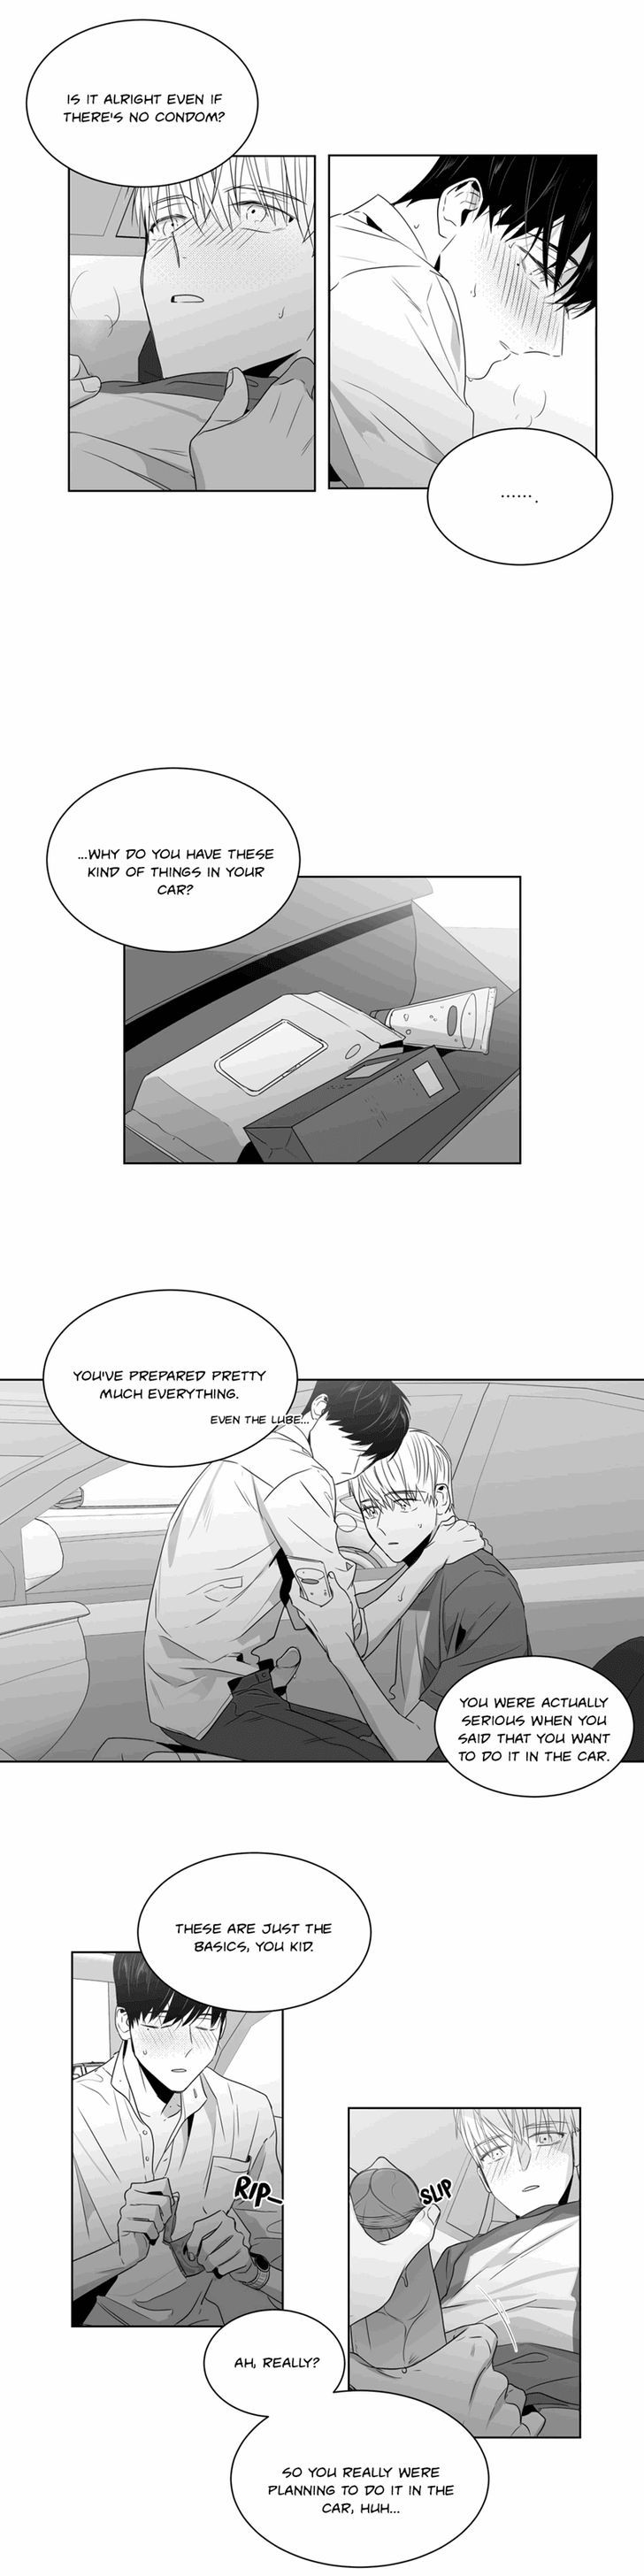 Lover Boy (Lezhin) Chapter 039 page 5